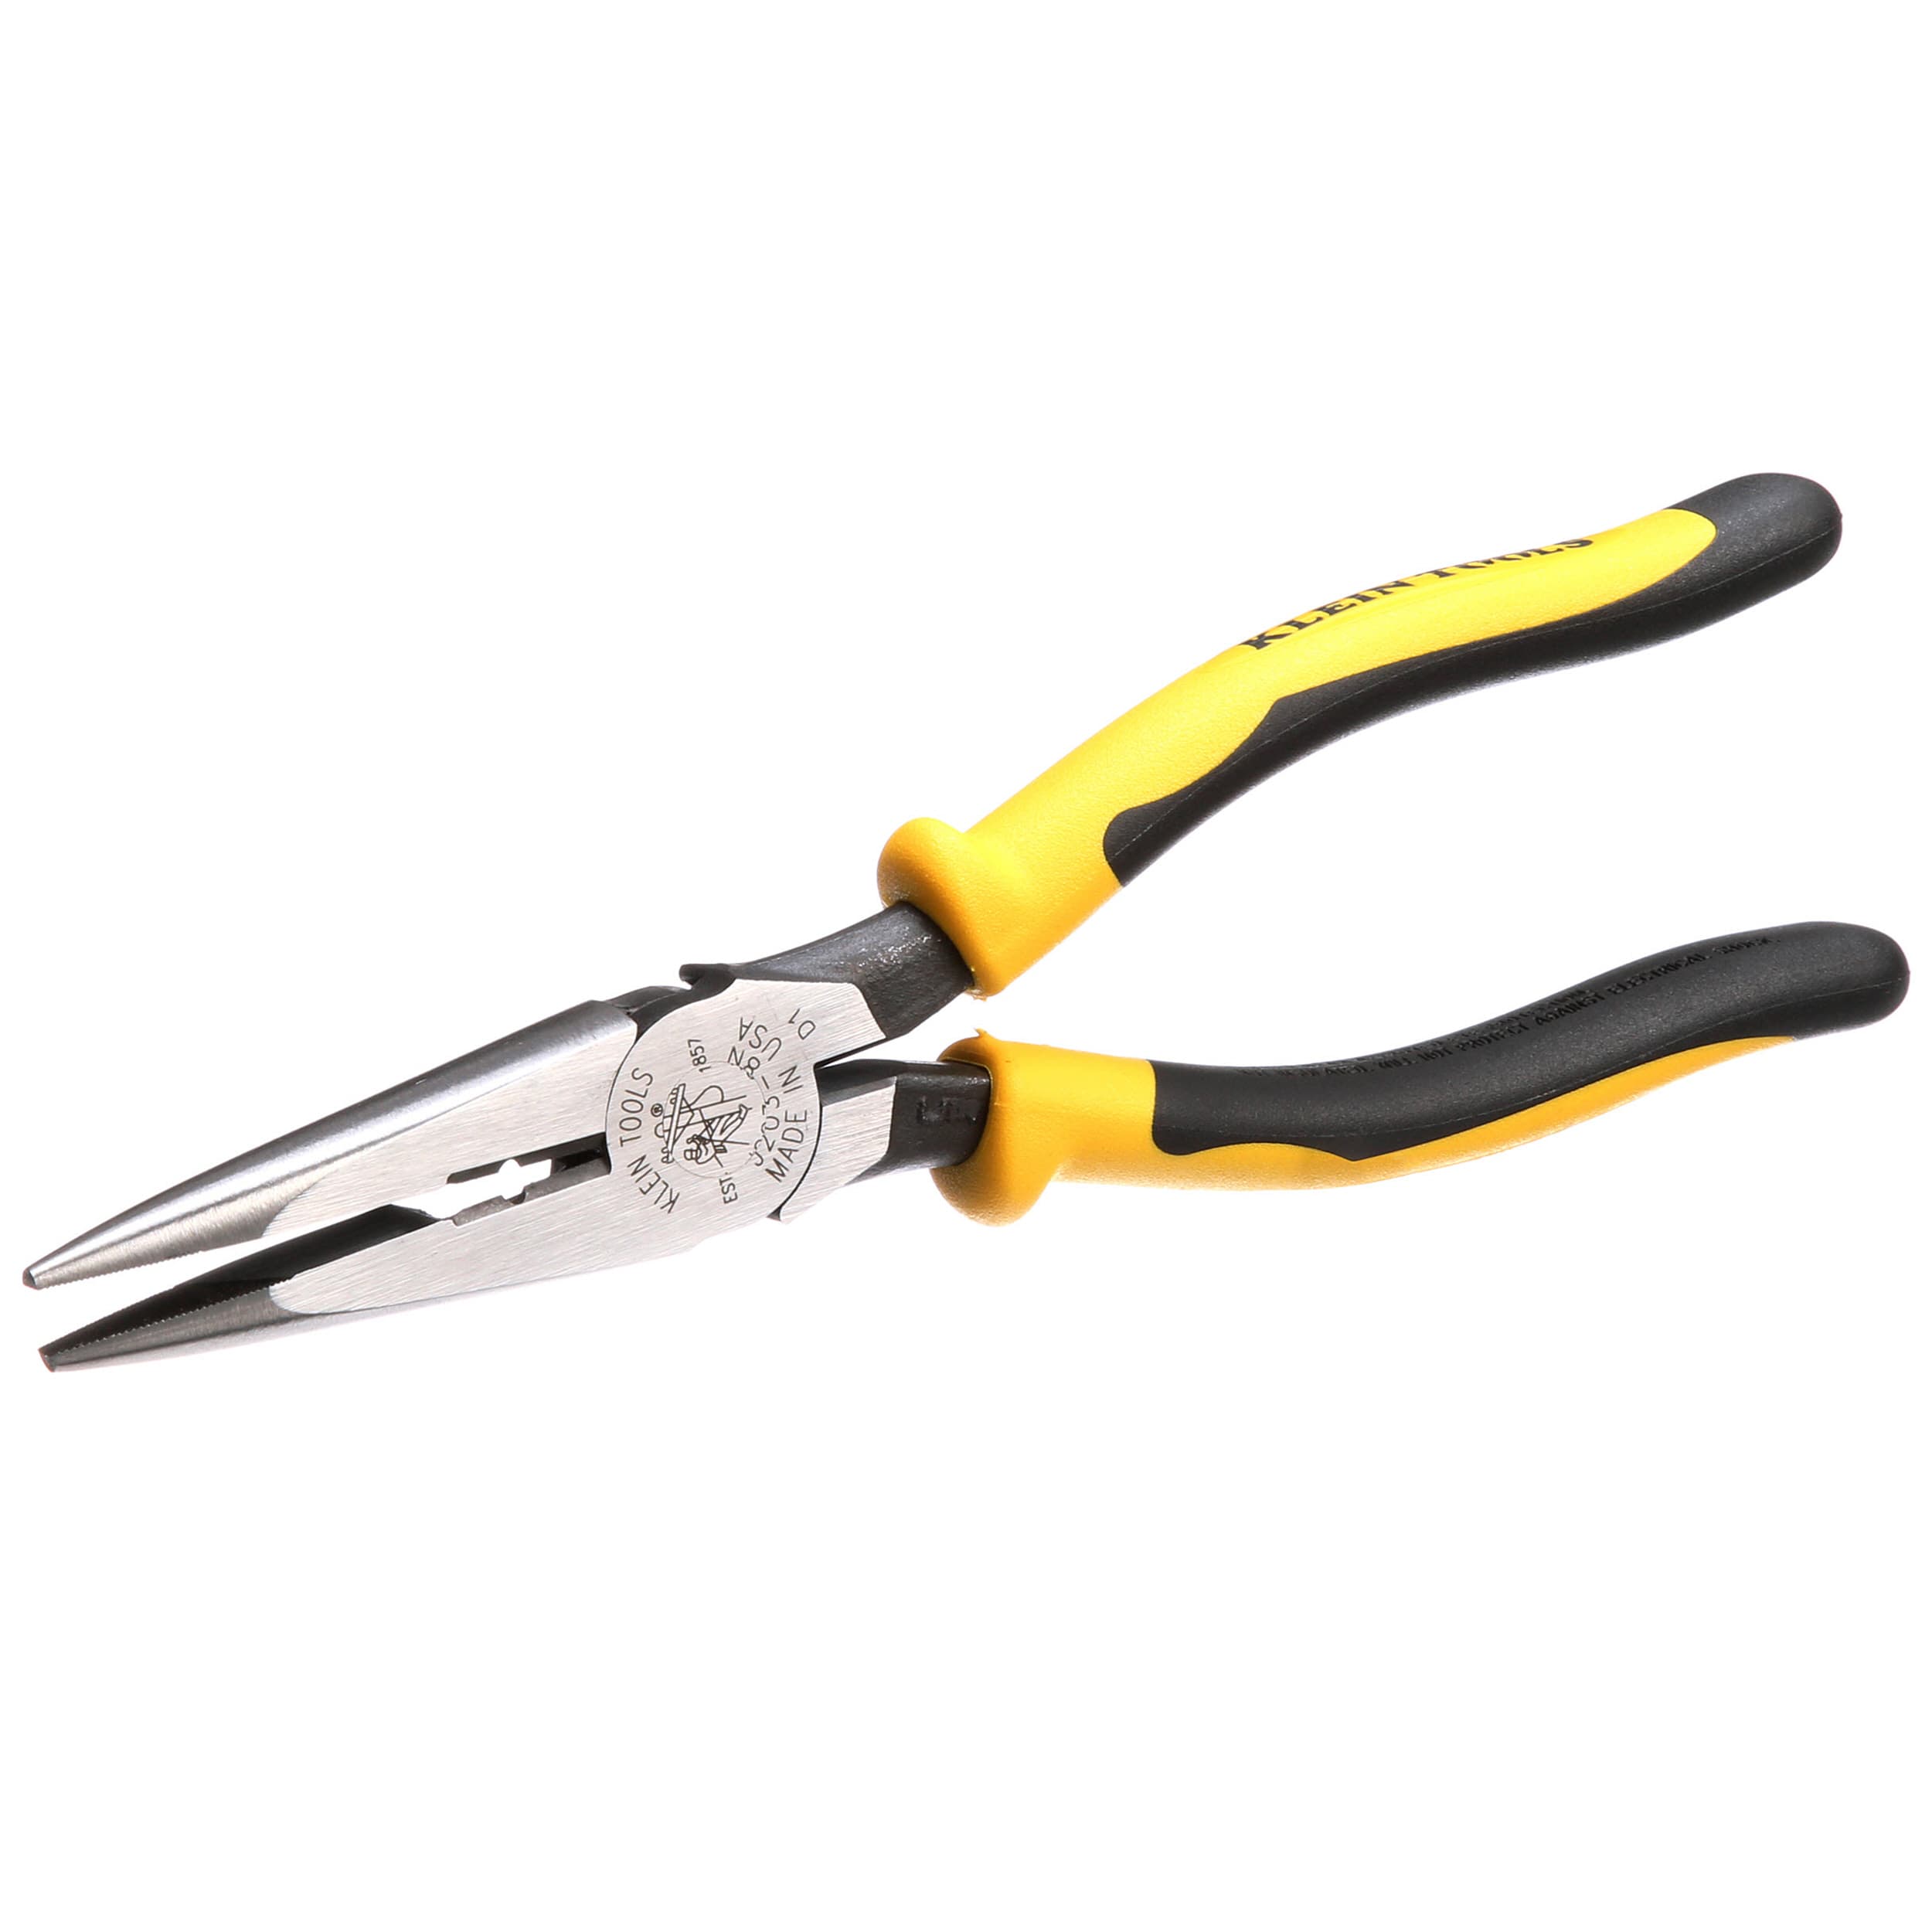 8 in. Journeyman Heavy Duty Long Nose Side Cutting Pliers with Skinning Hole